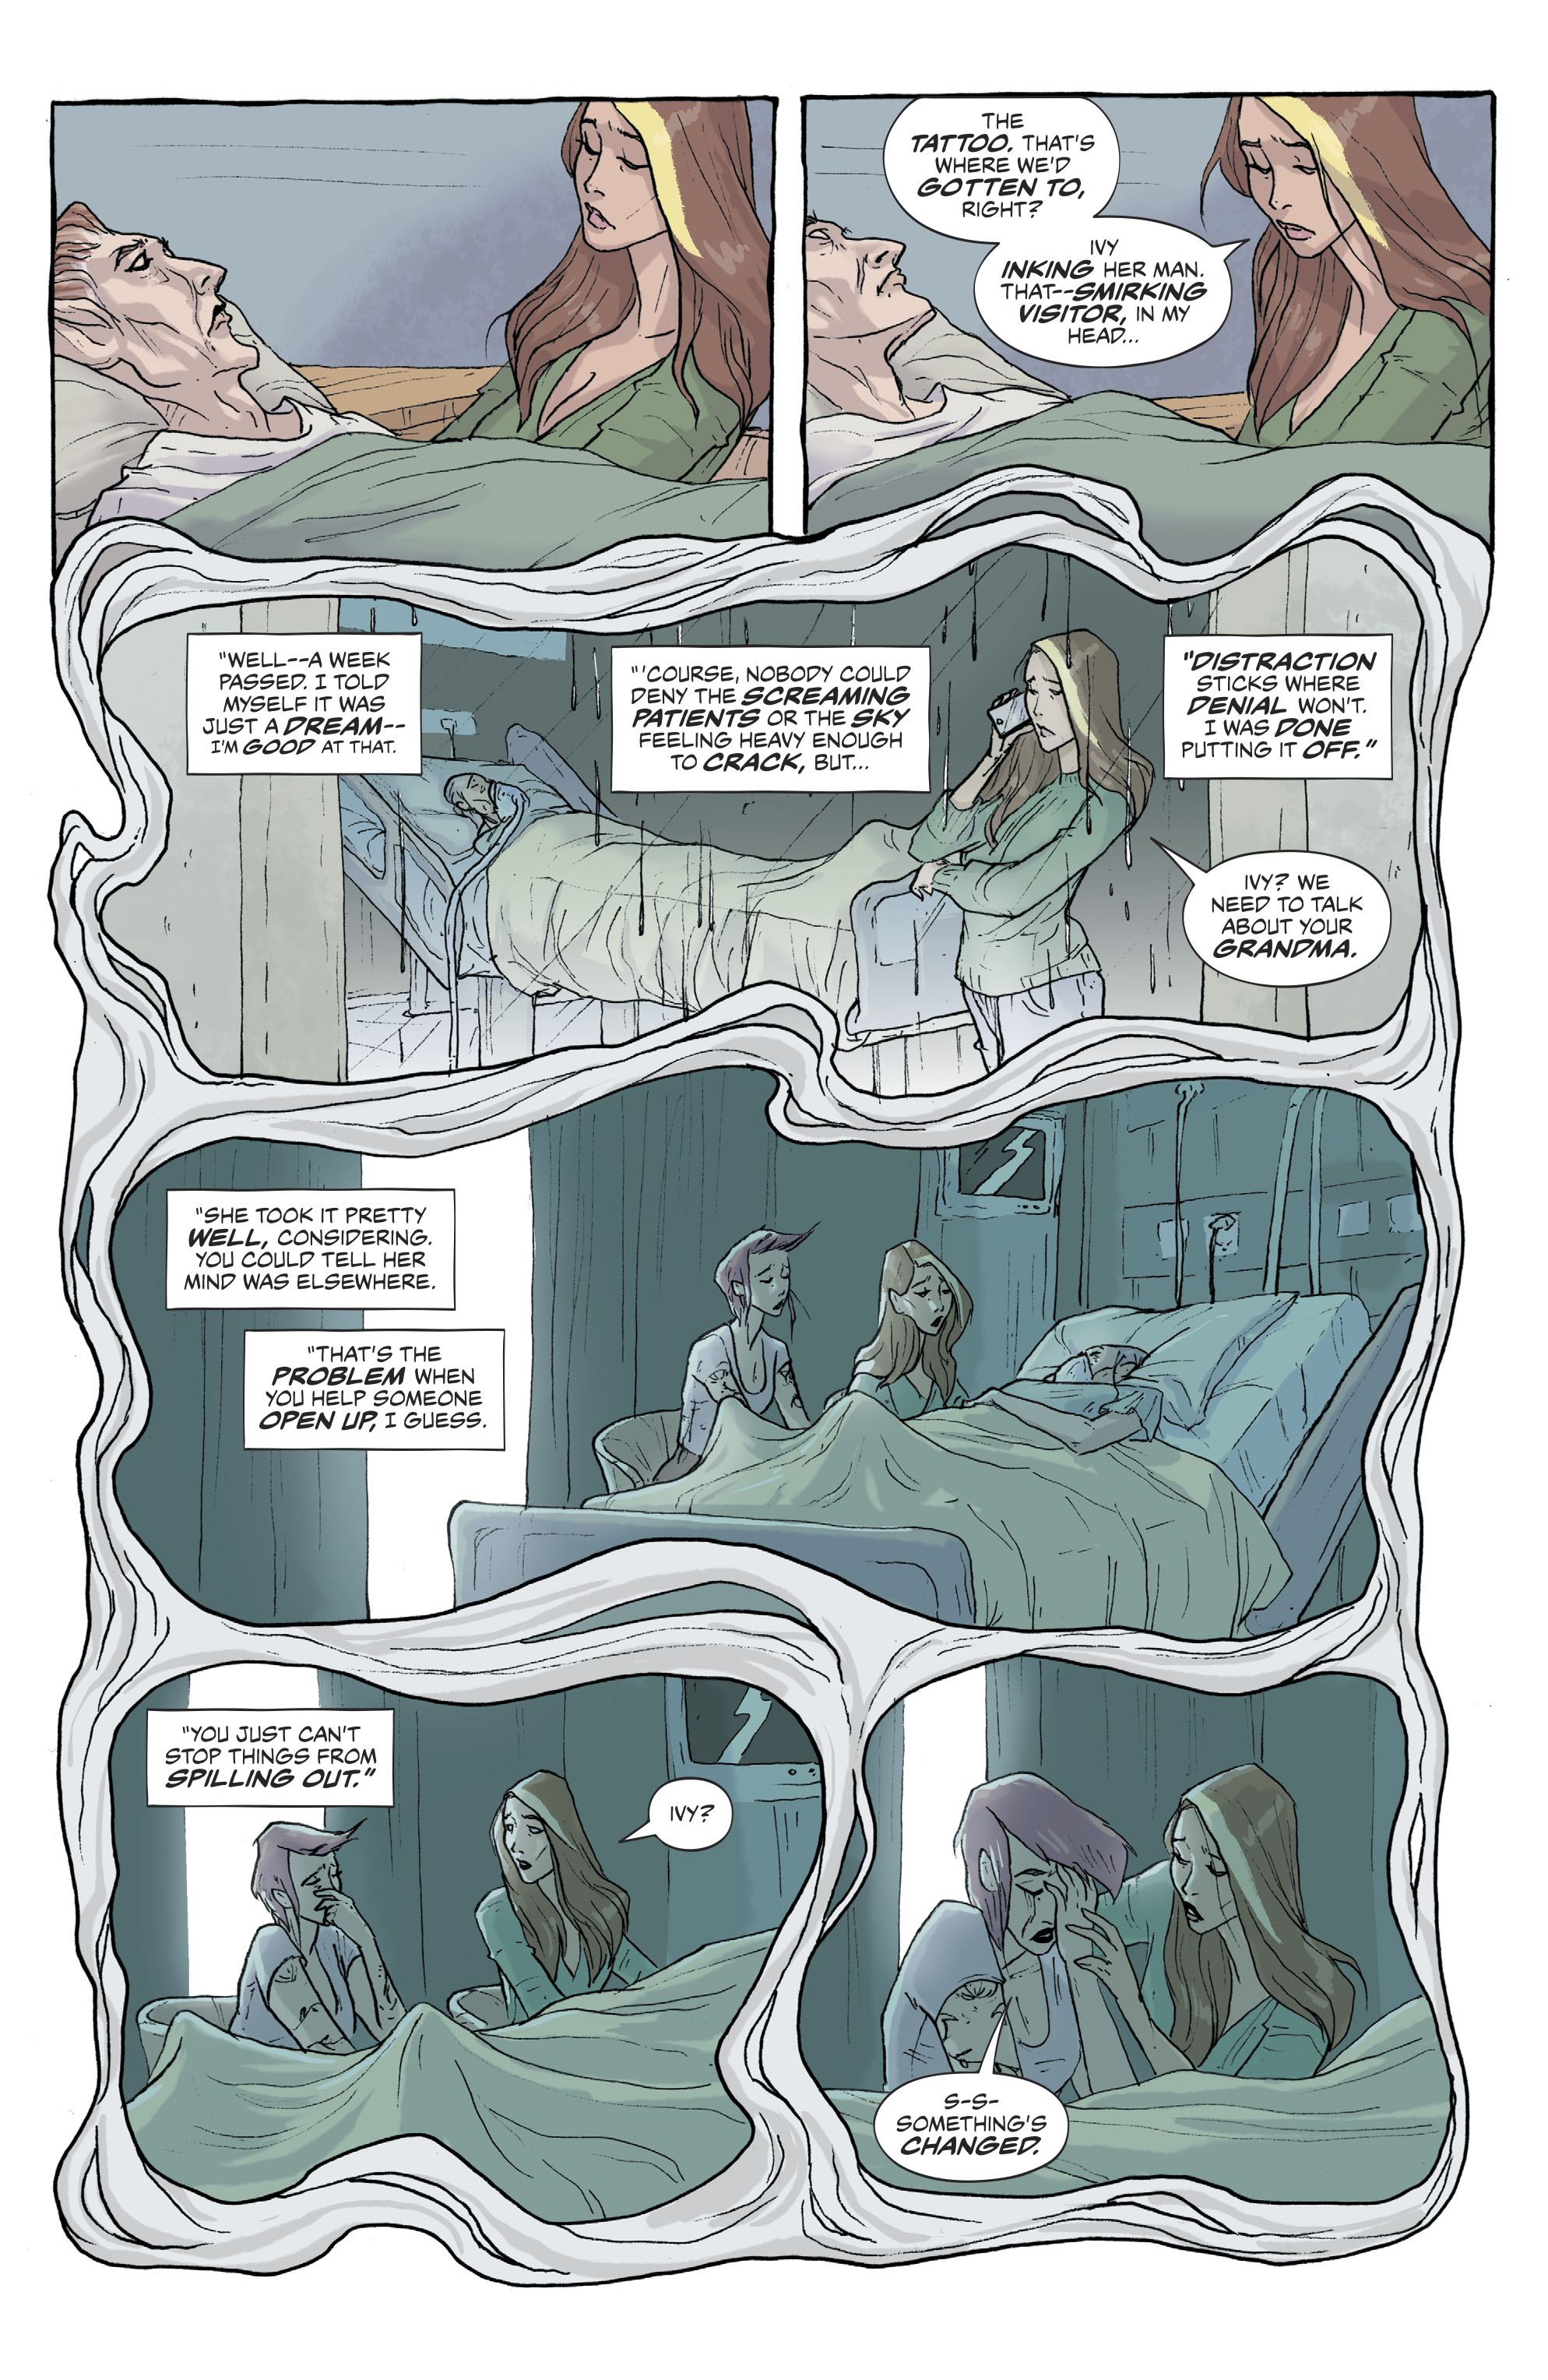 The Dreaming (2018-): Chapter 8 - Page 4